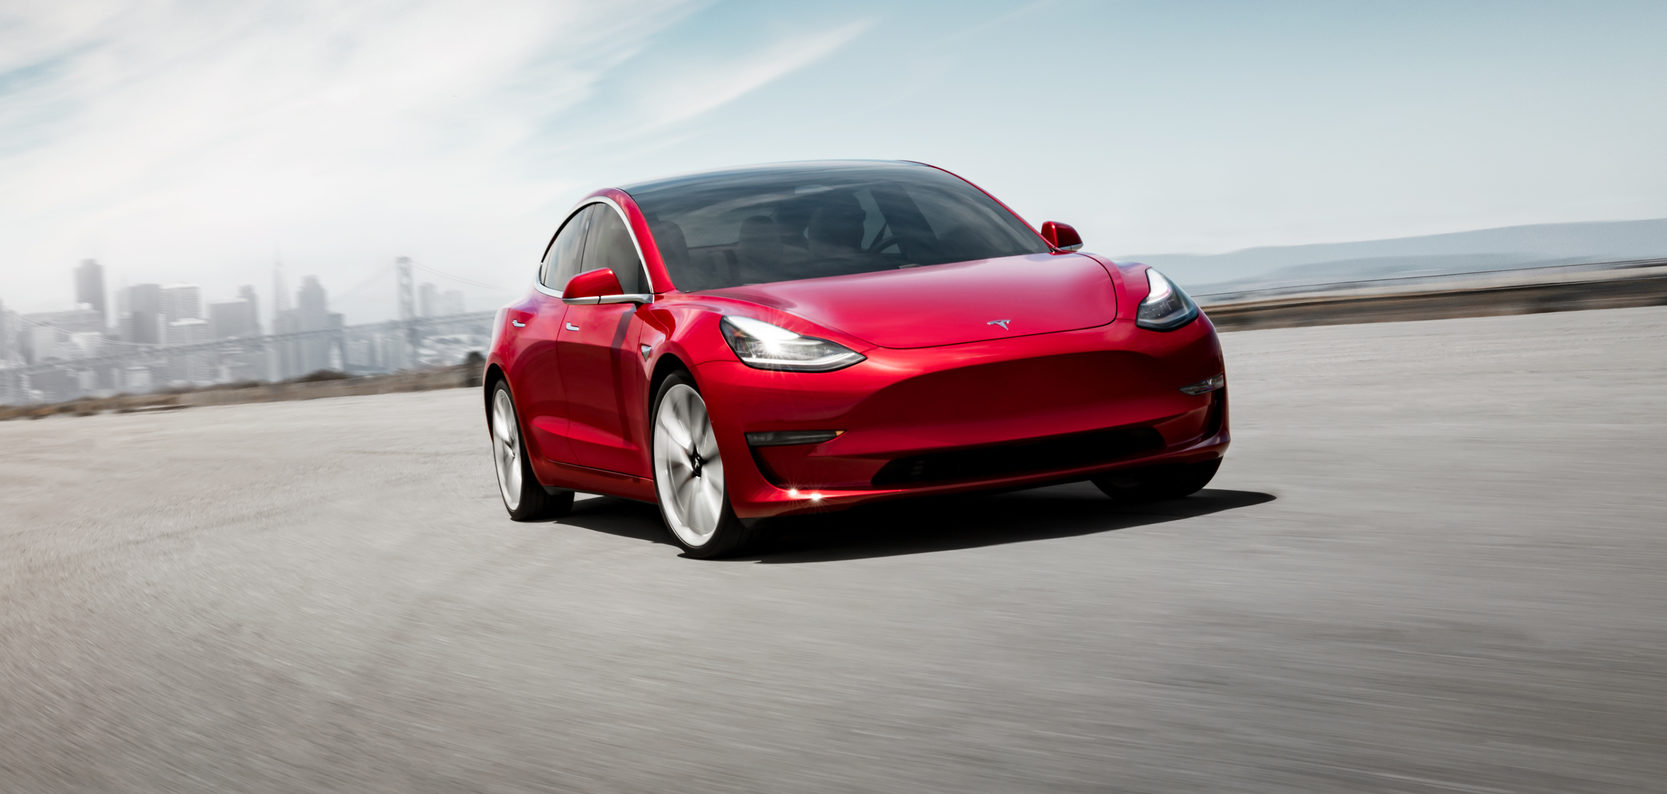 Tesla is ending the era of half-hearted, compliance electric cars